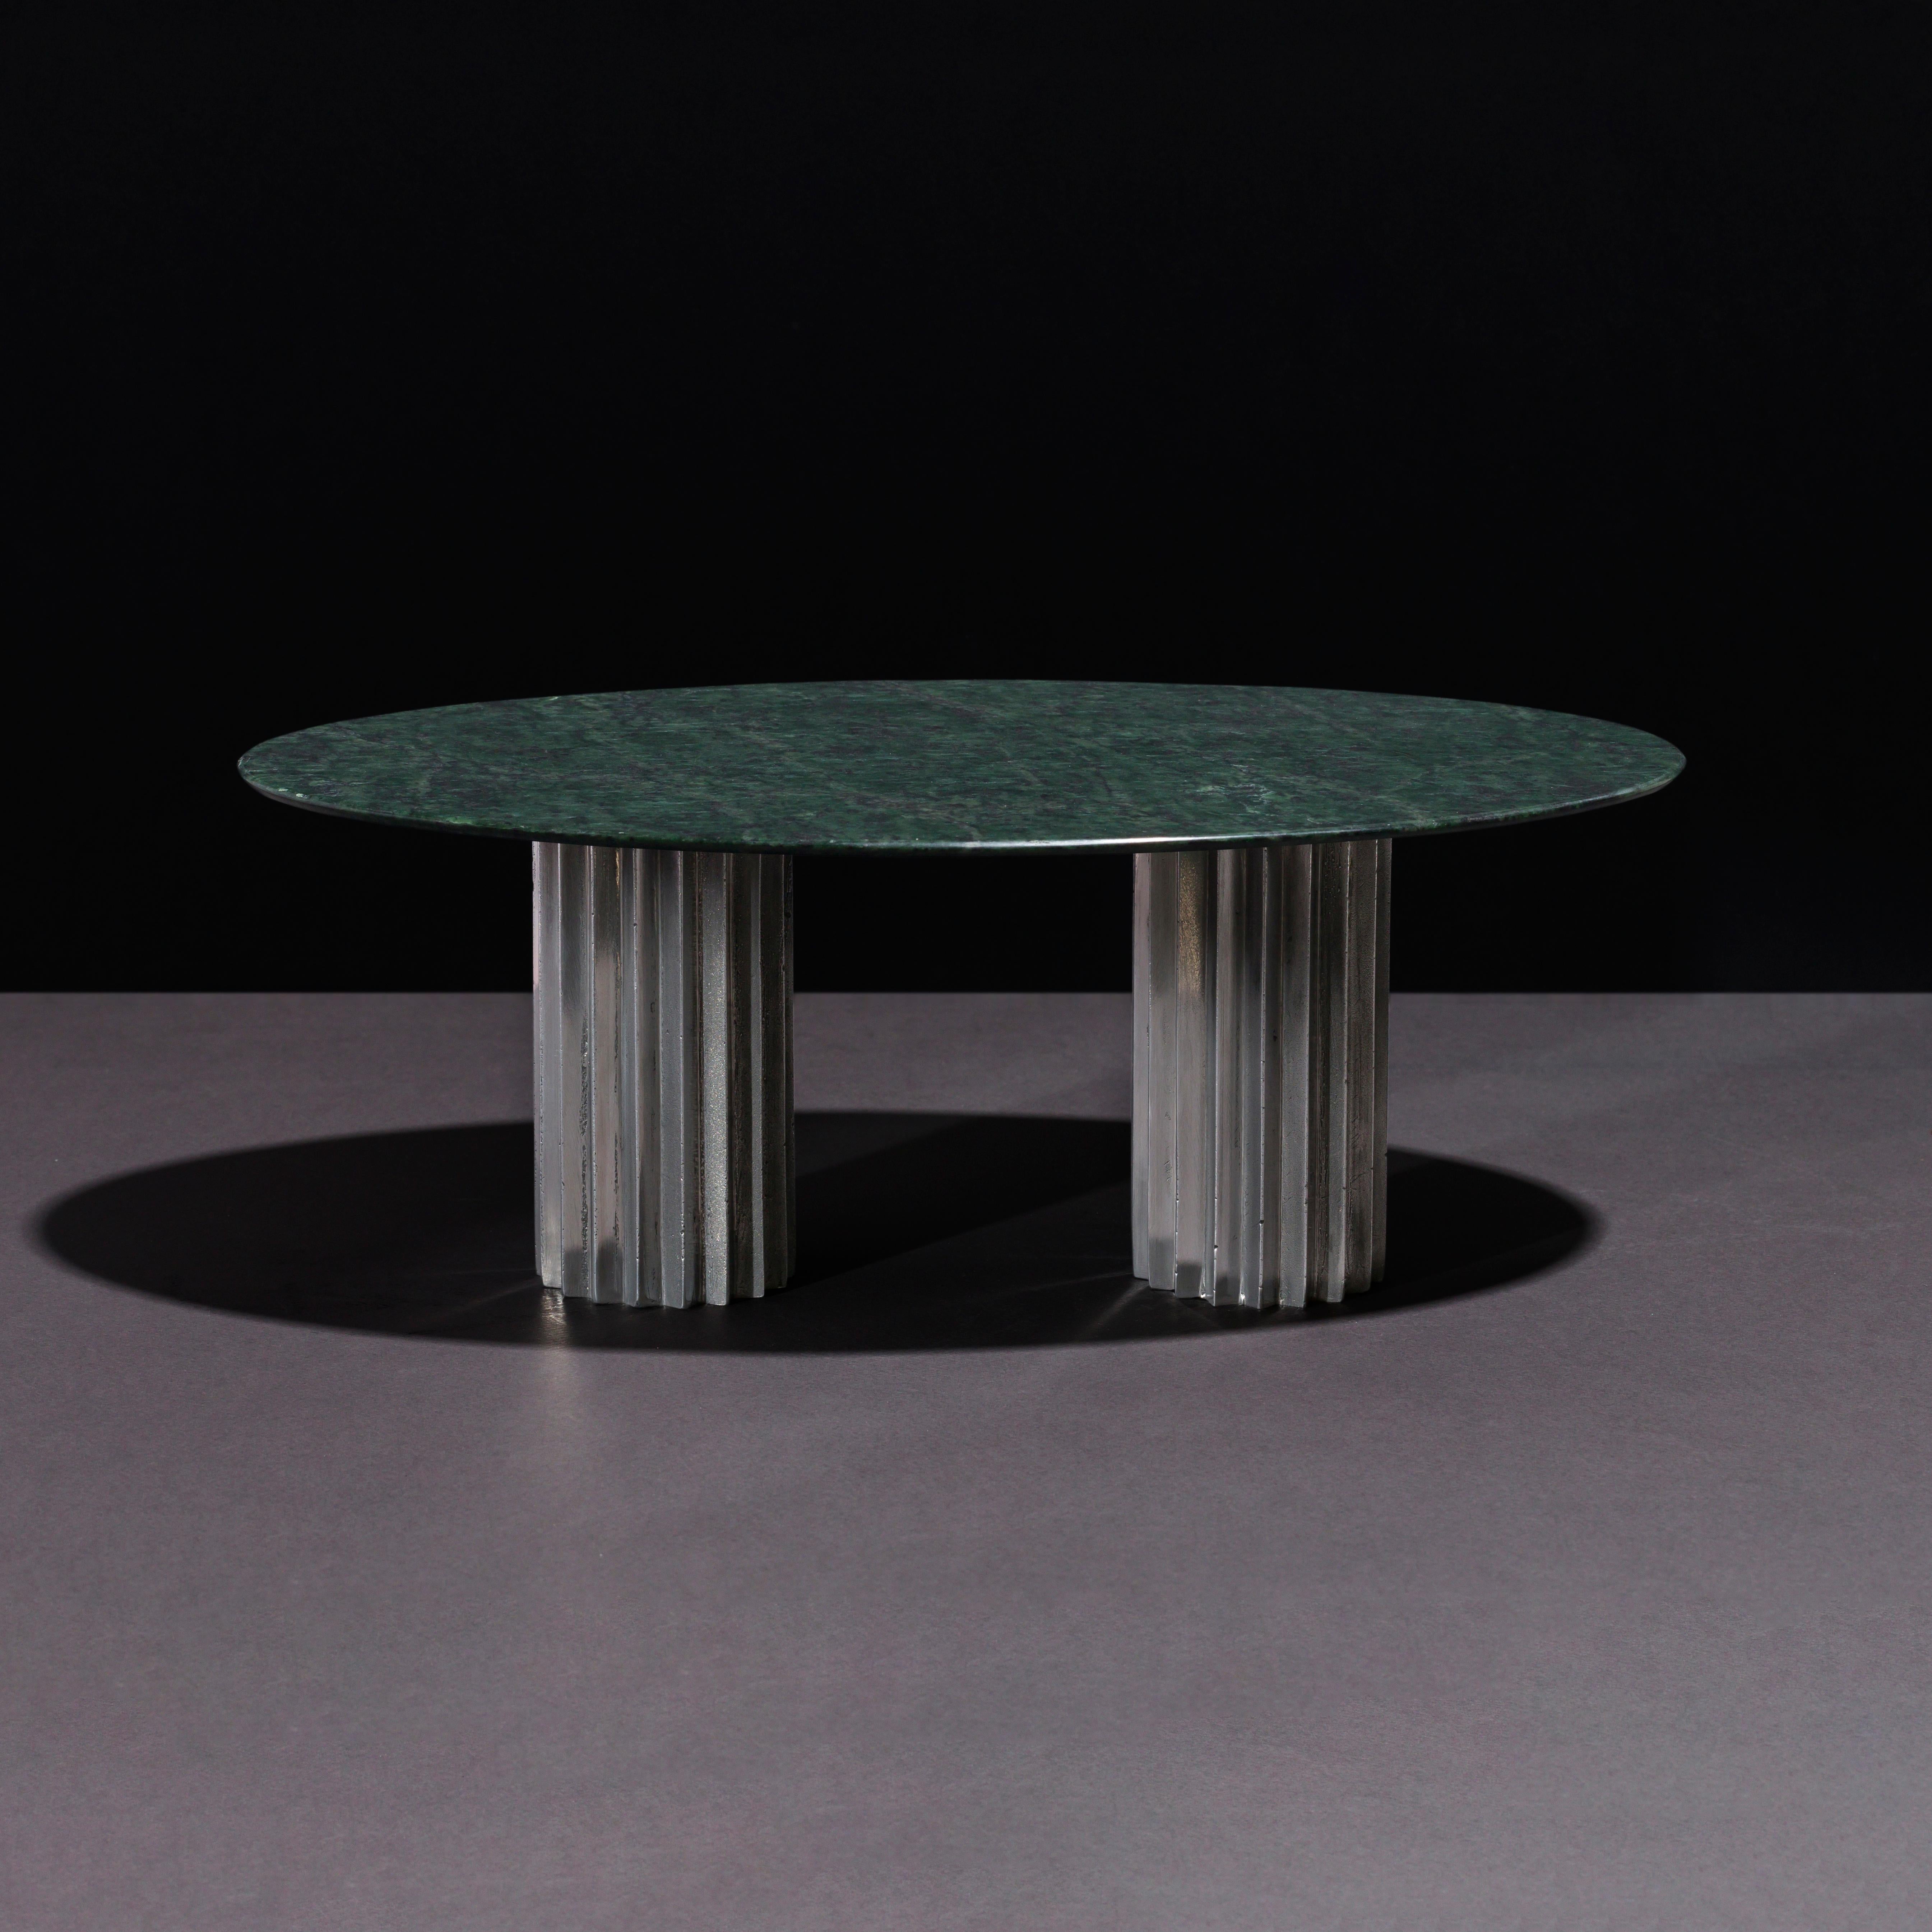 Other Doris Green Serpentino Marble Oval Dining Table by Fred and Juul For Sale